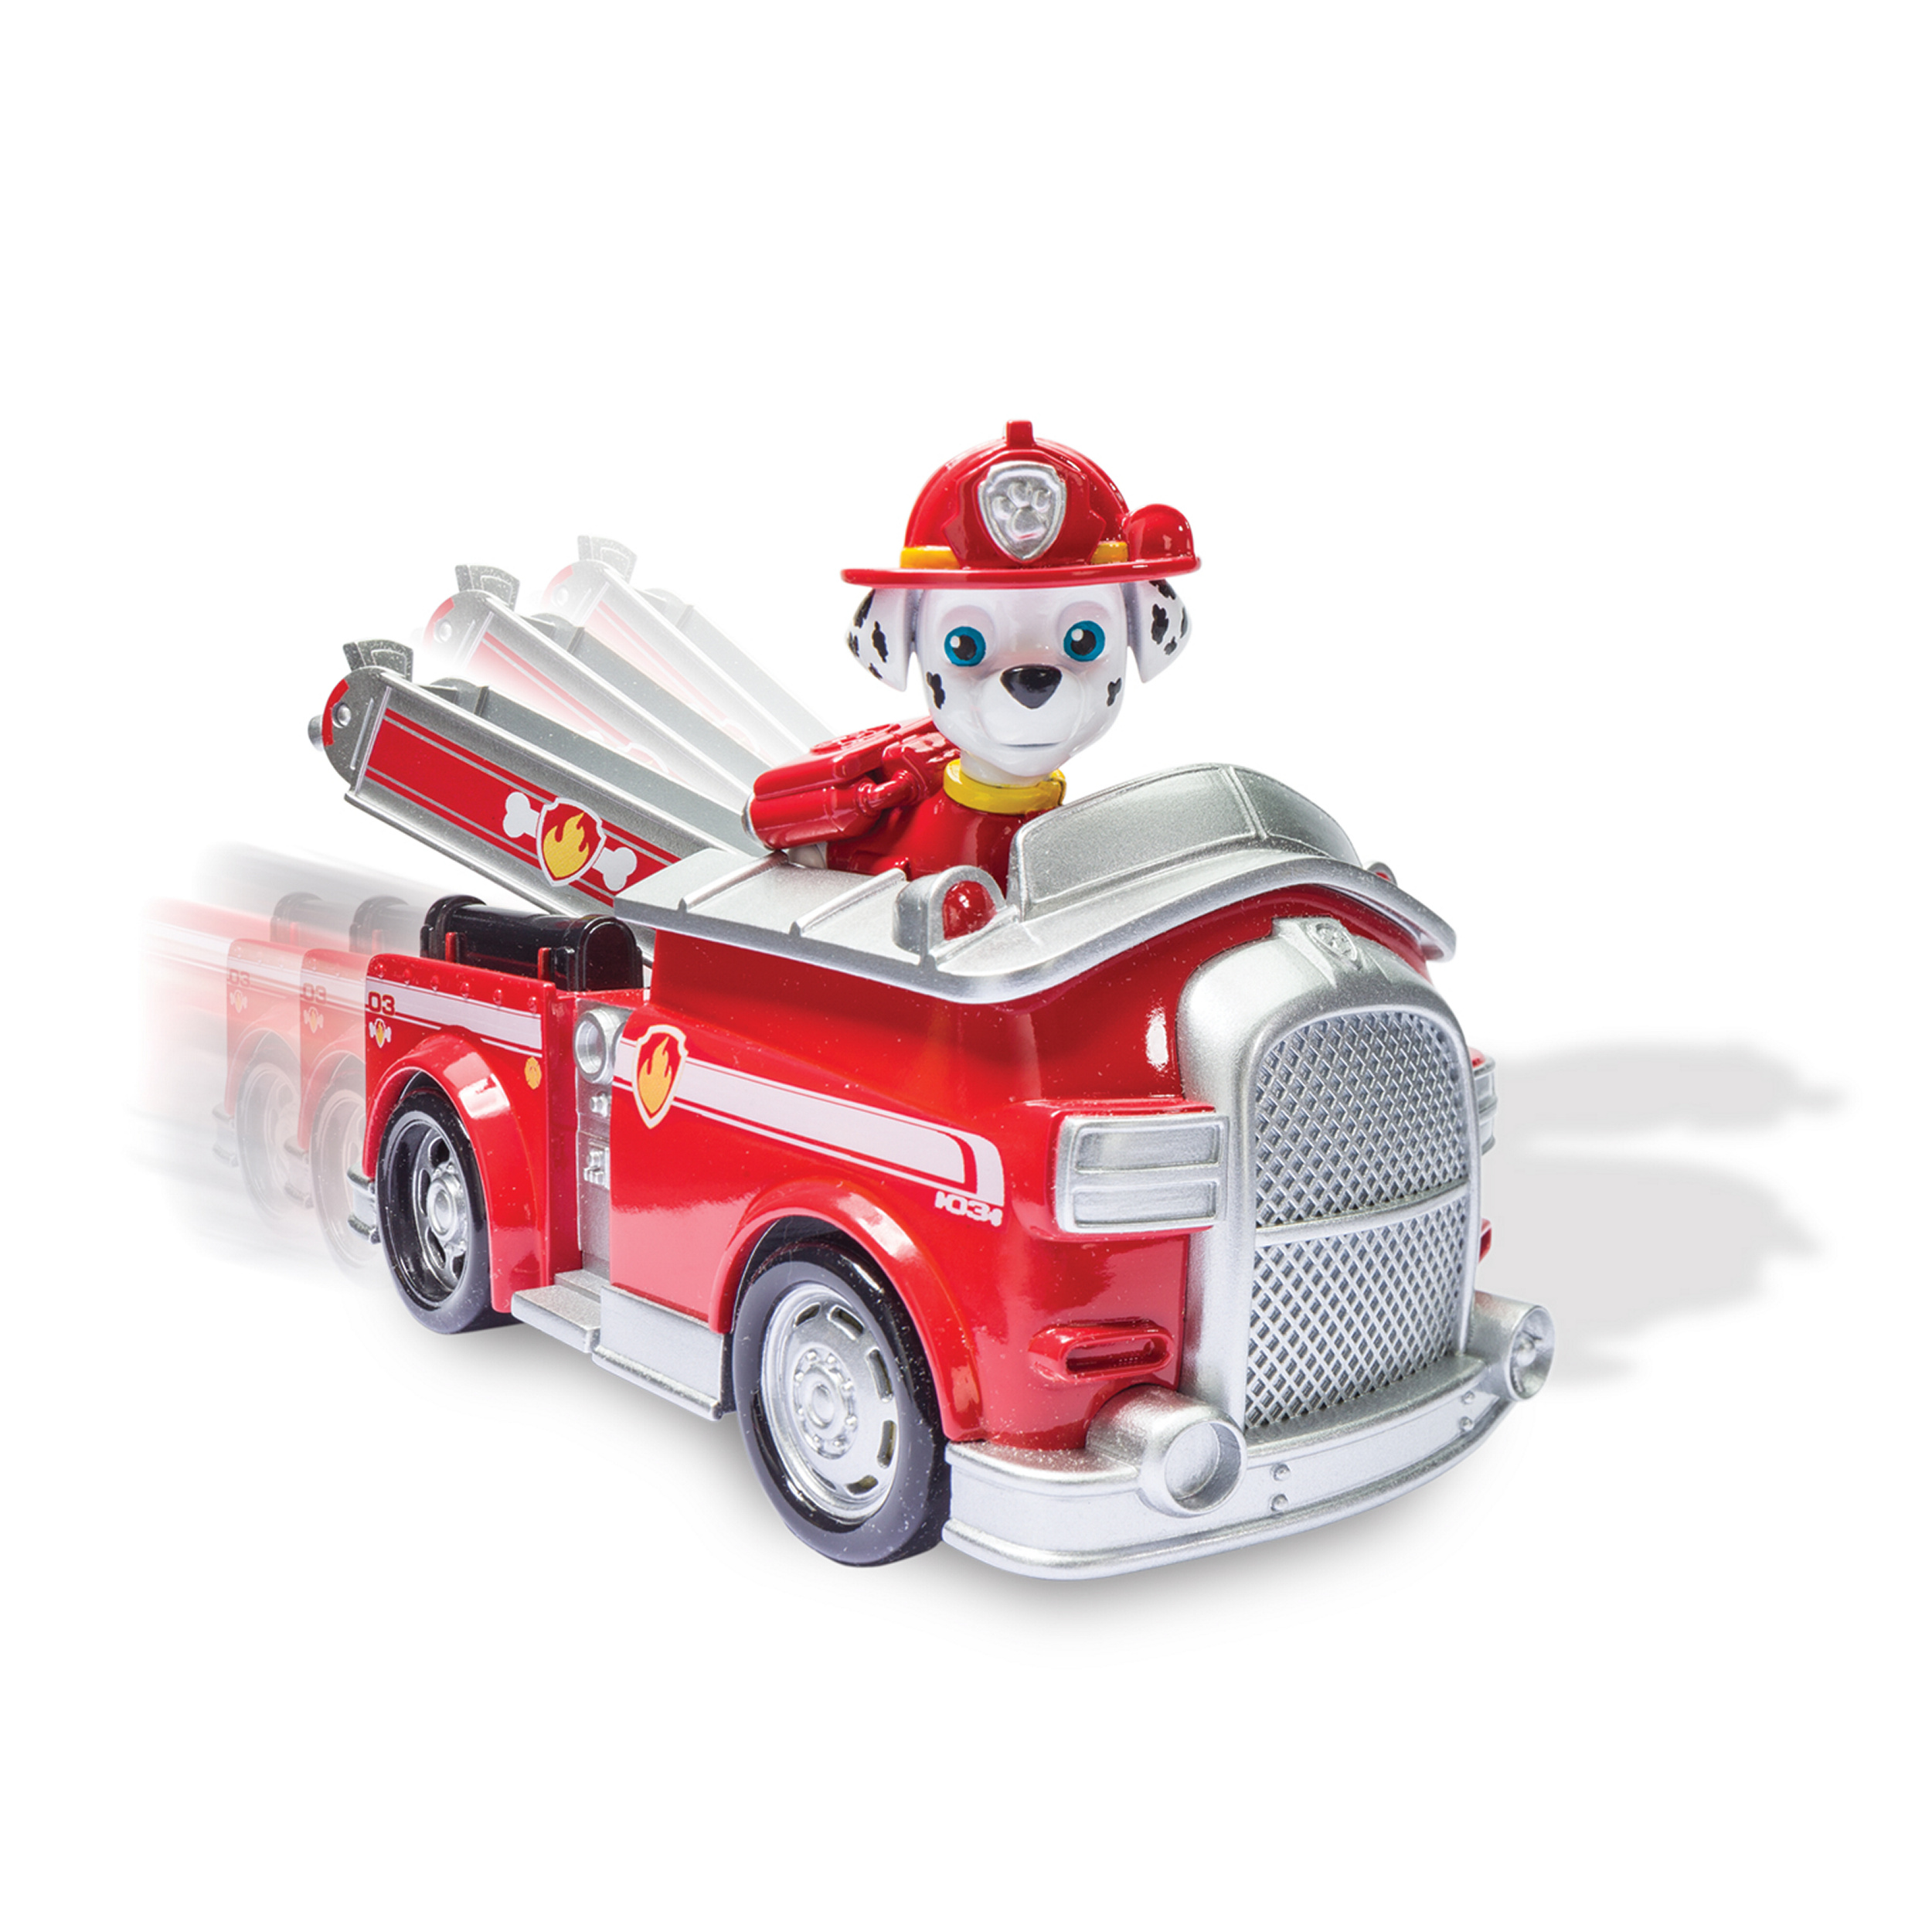 Paw Patrol Marshall's Fire Fightin' Truck, Vehicle and Figure - image 3 of 6